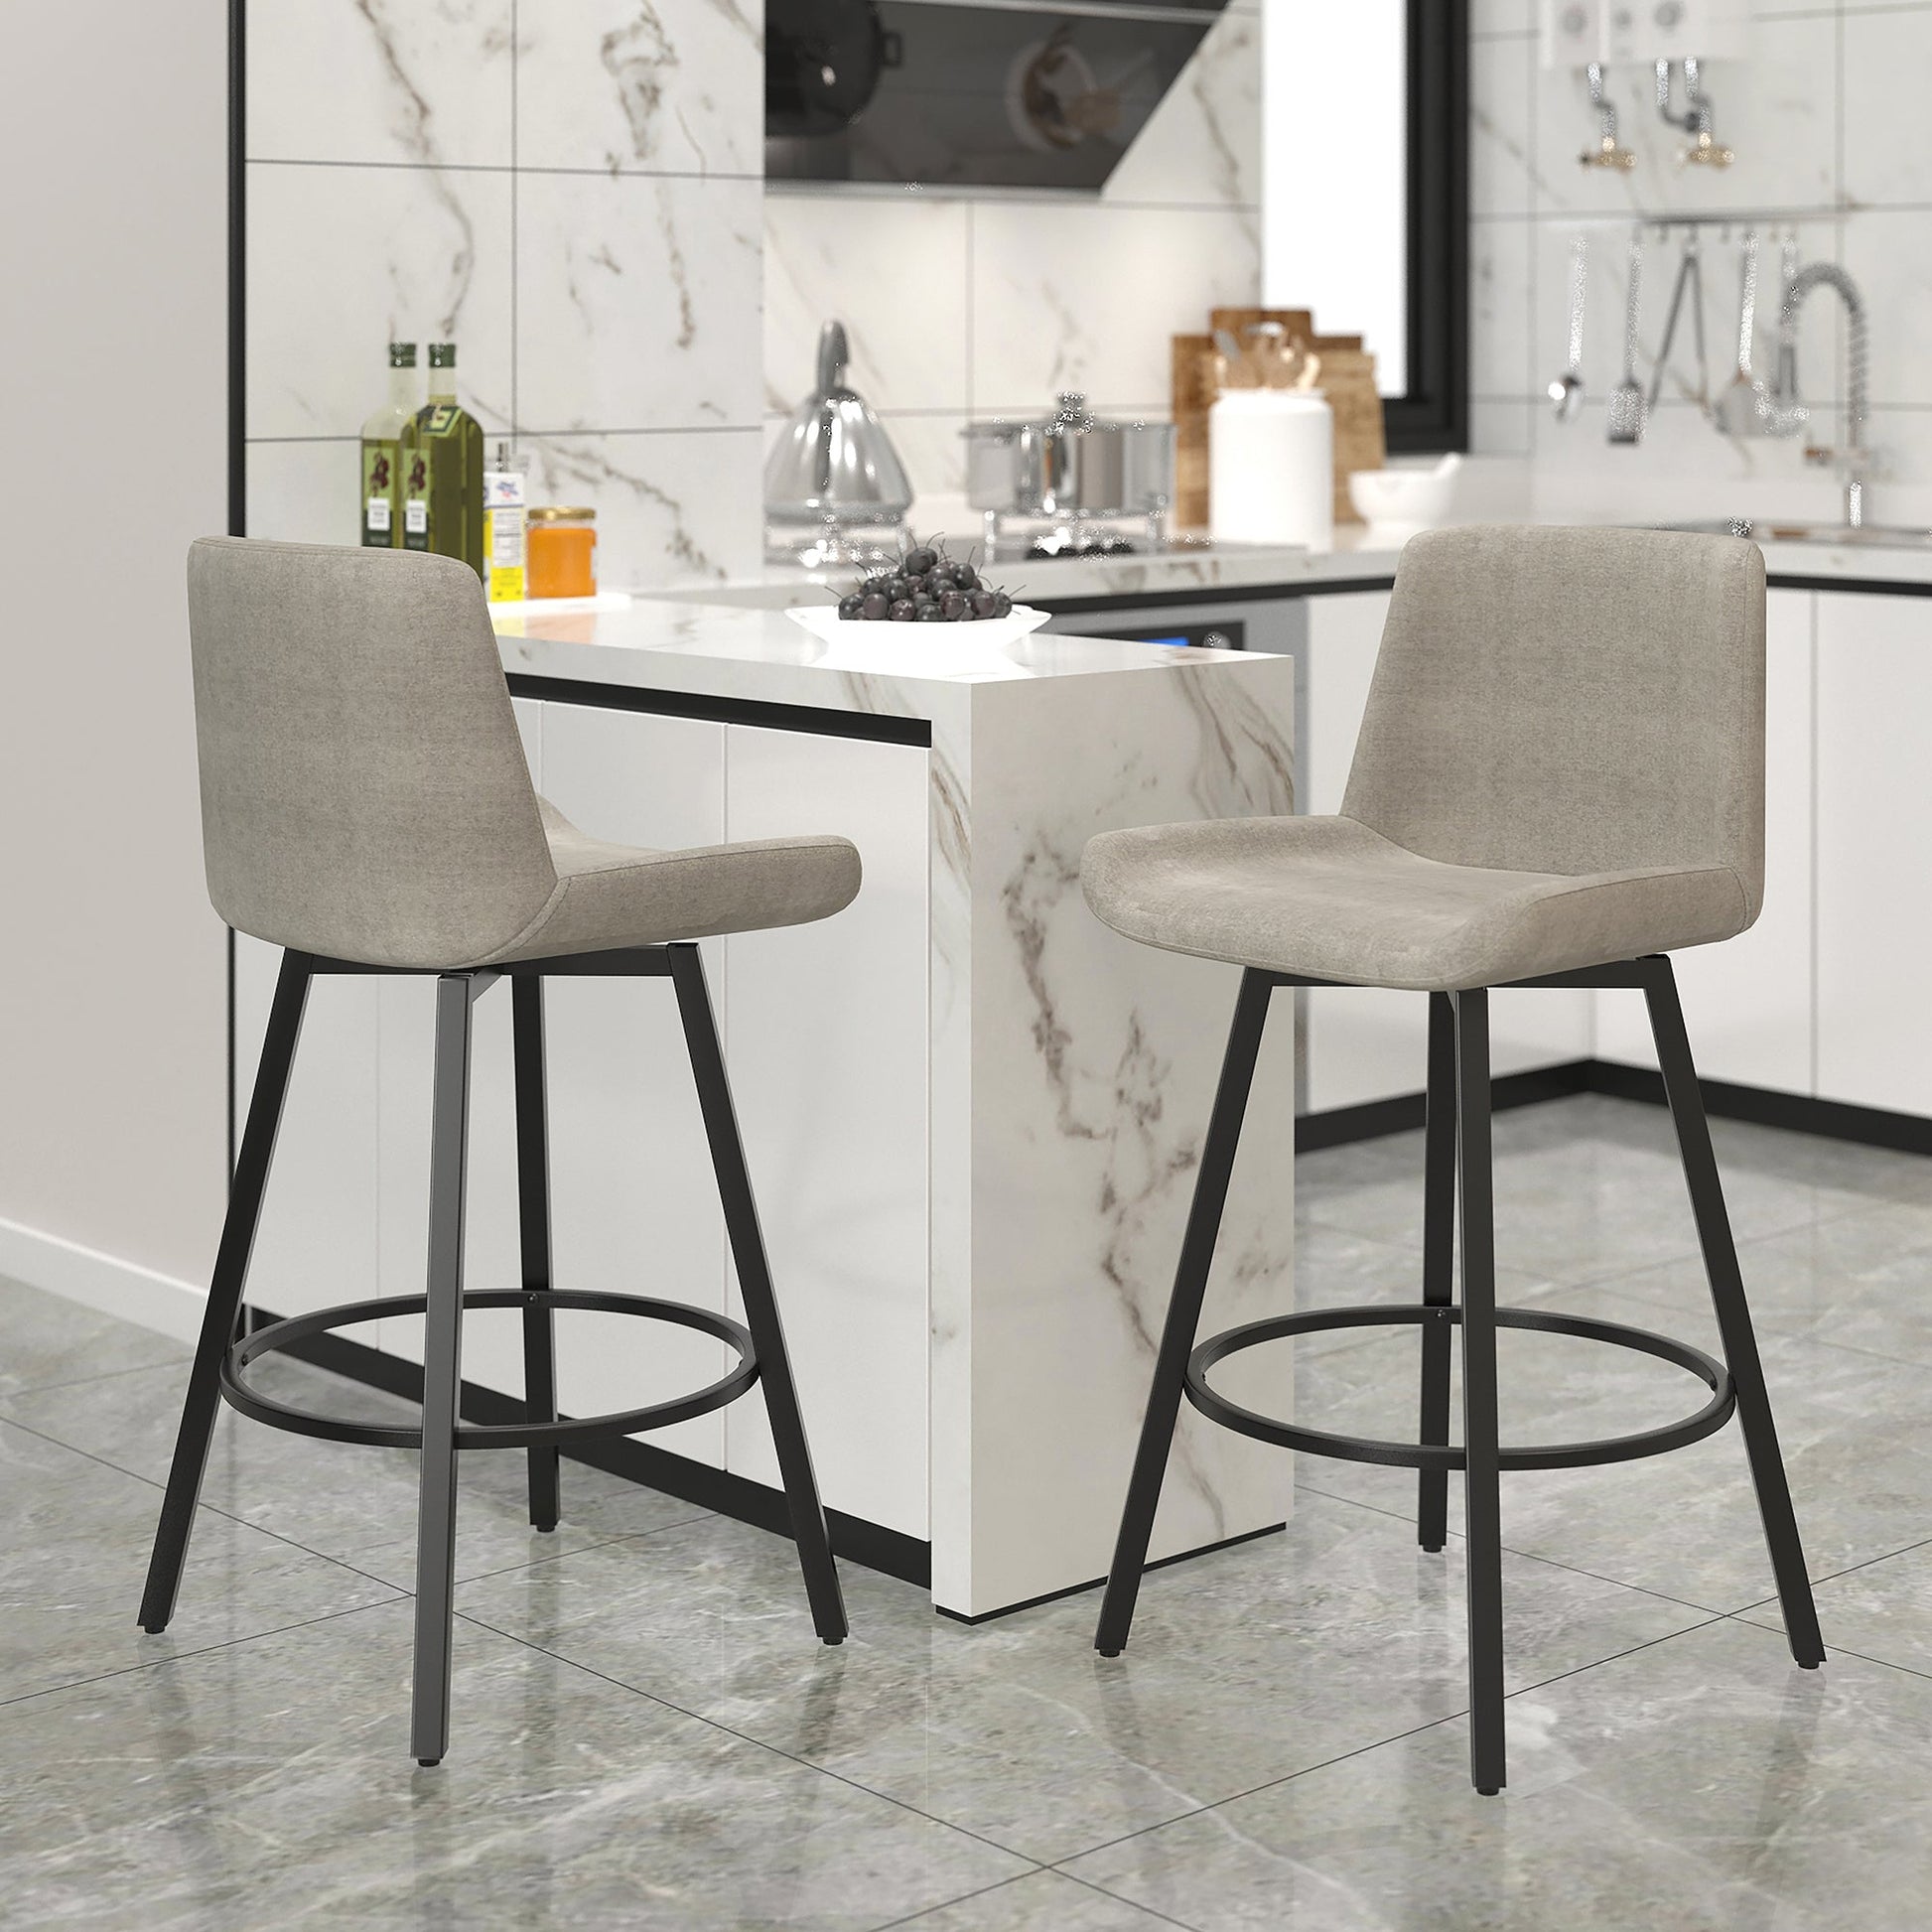 26 inch Bar Stools | Sets of 2 | Fern Grey and Black - Your Bar Stools Canada